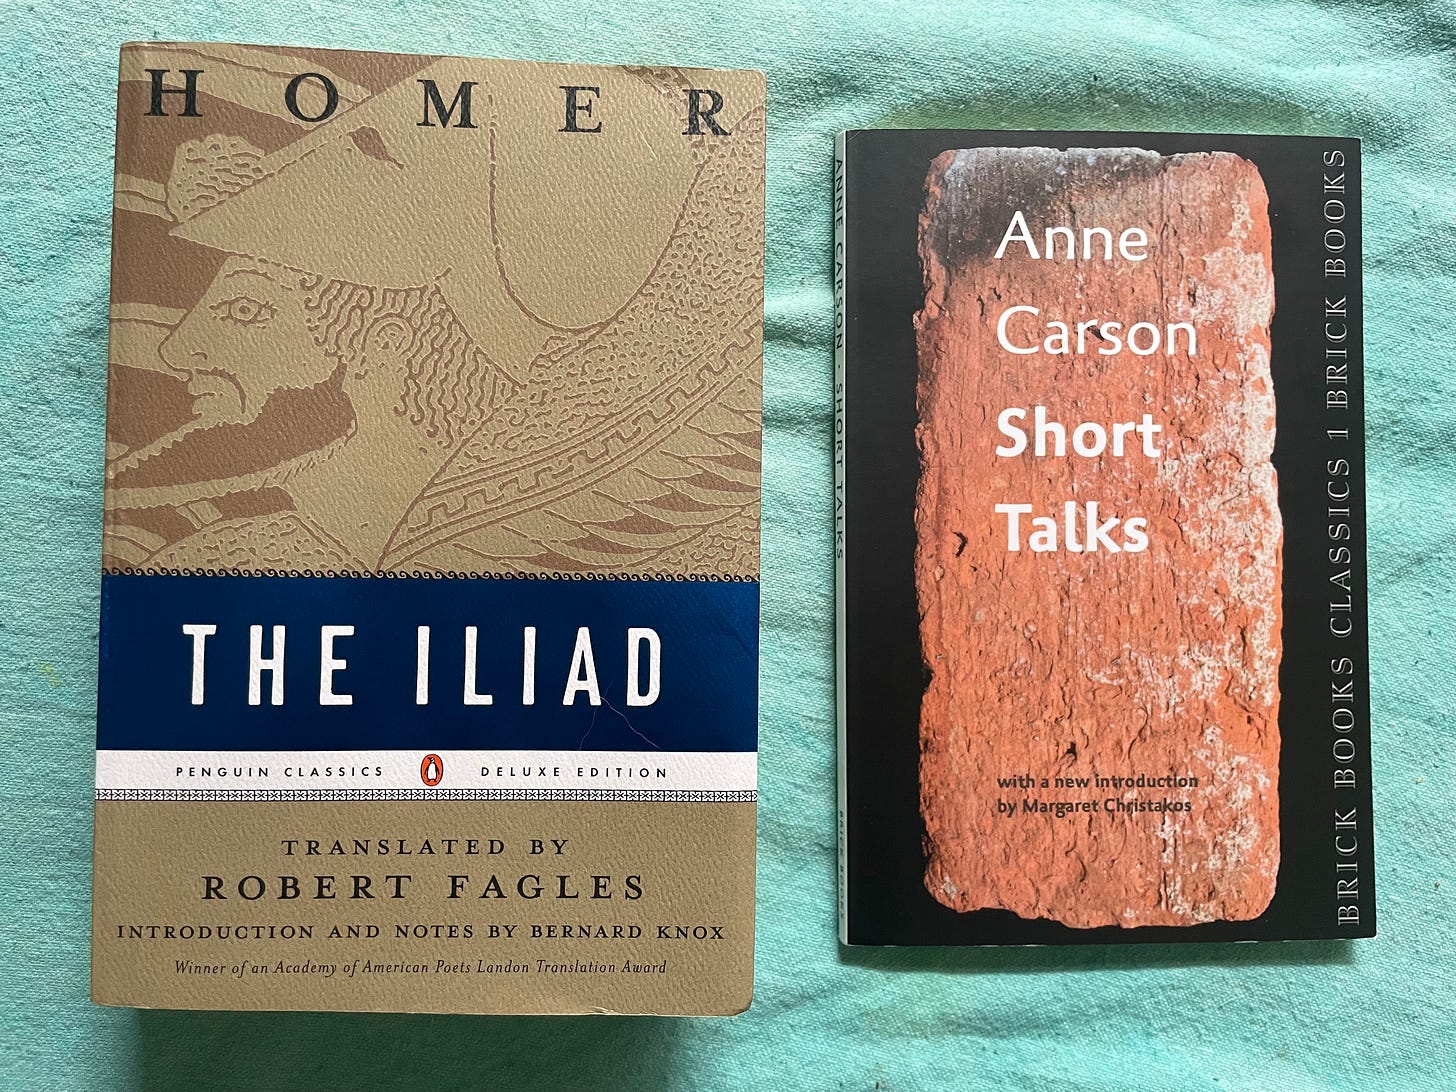 'The Iliad' by Homer and 'Short Talks' by Anne Carson